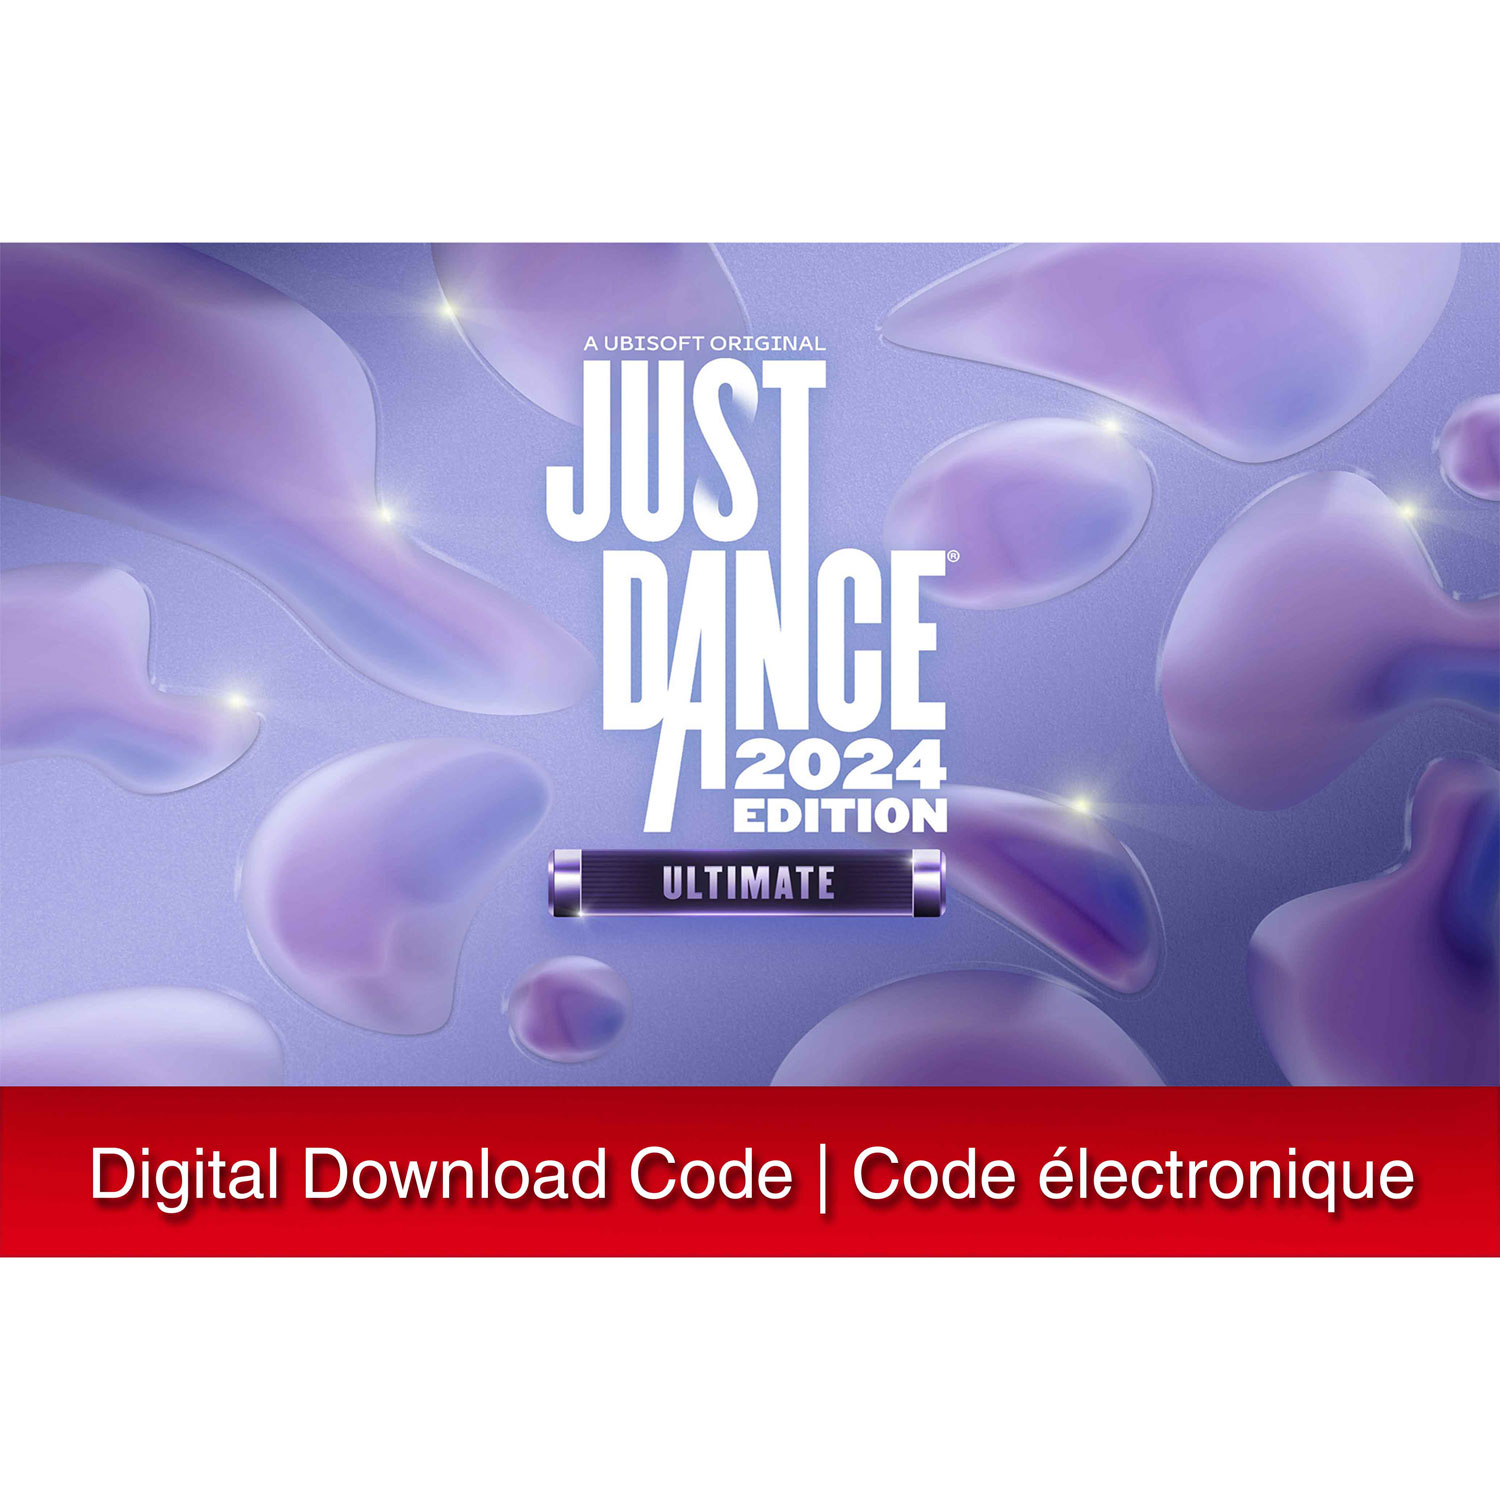 Just Dance 2024: Ultimate Edition (Switch) - Digital Download